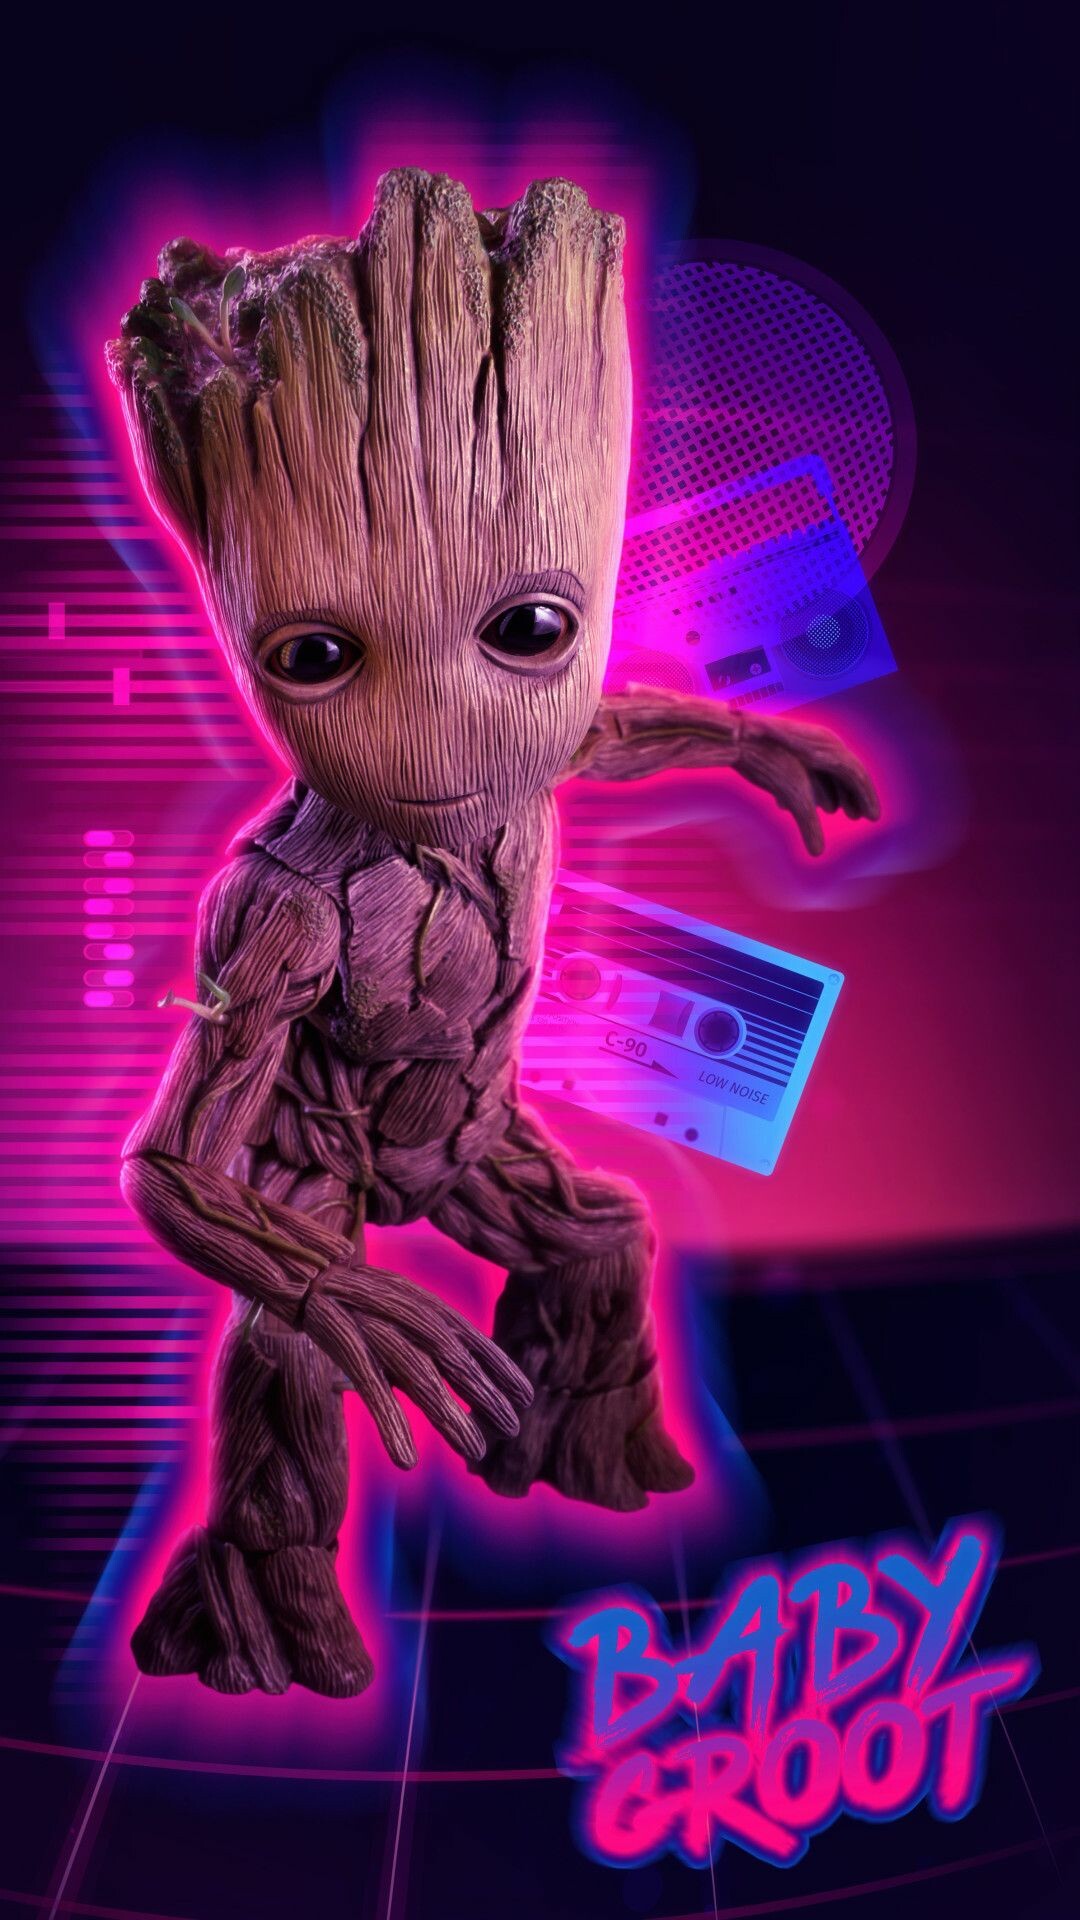 Marvel's Guardians of the Galaxy: By the end of the game, players should have an extensive knowledge of each character's backstory, motivations, and personality, and all of that culminates in each member feeling three-dimensional, Marvel game. 1080x1920 Full HD Wallpaper.